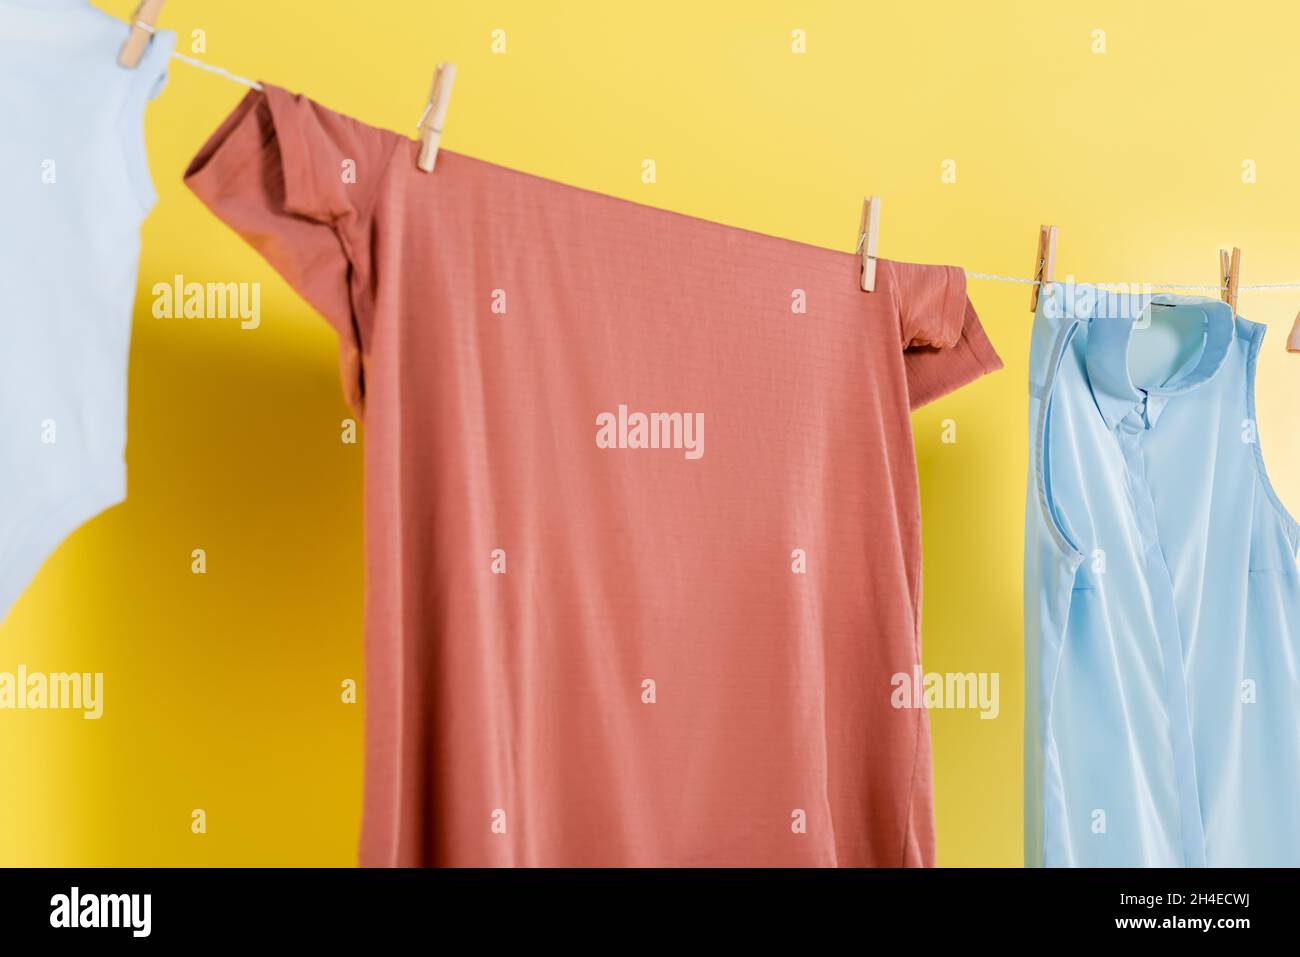 clean laundry hanging on rope on yellow background Stock Photo